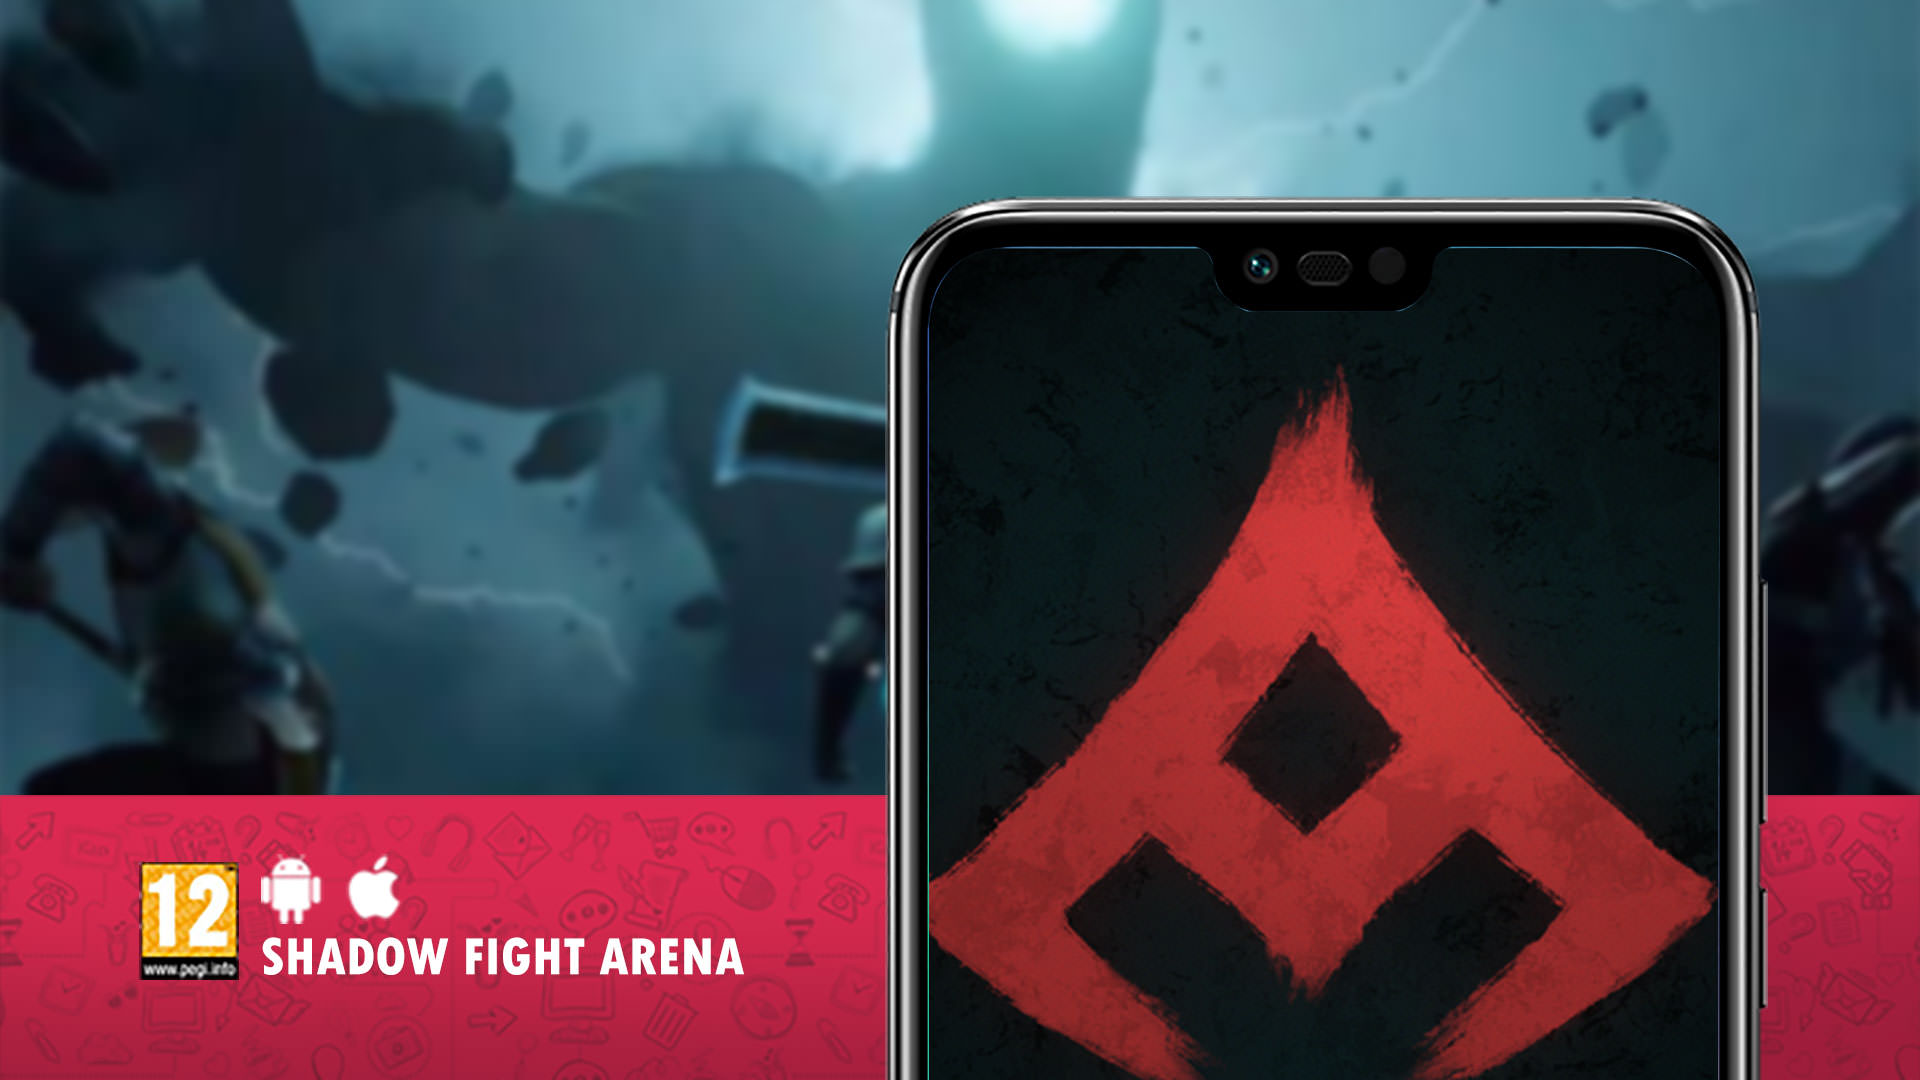 download free shadow fight 4 arena download